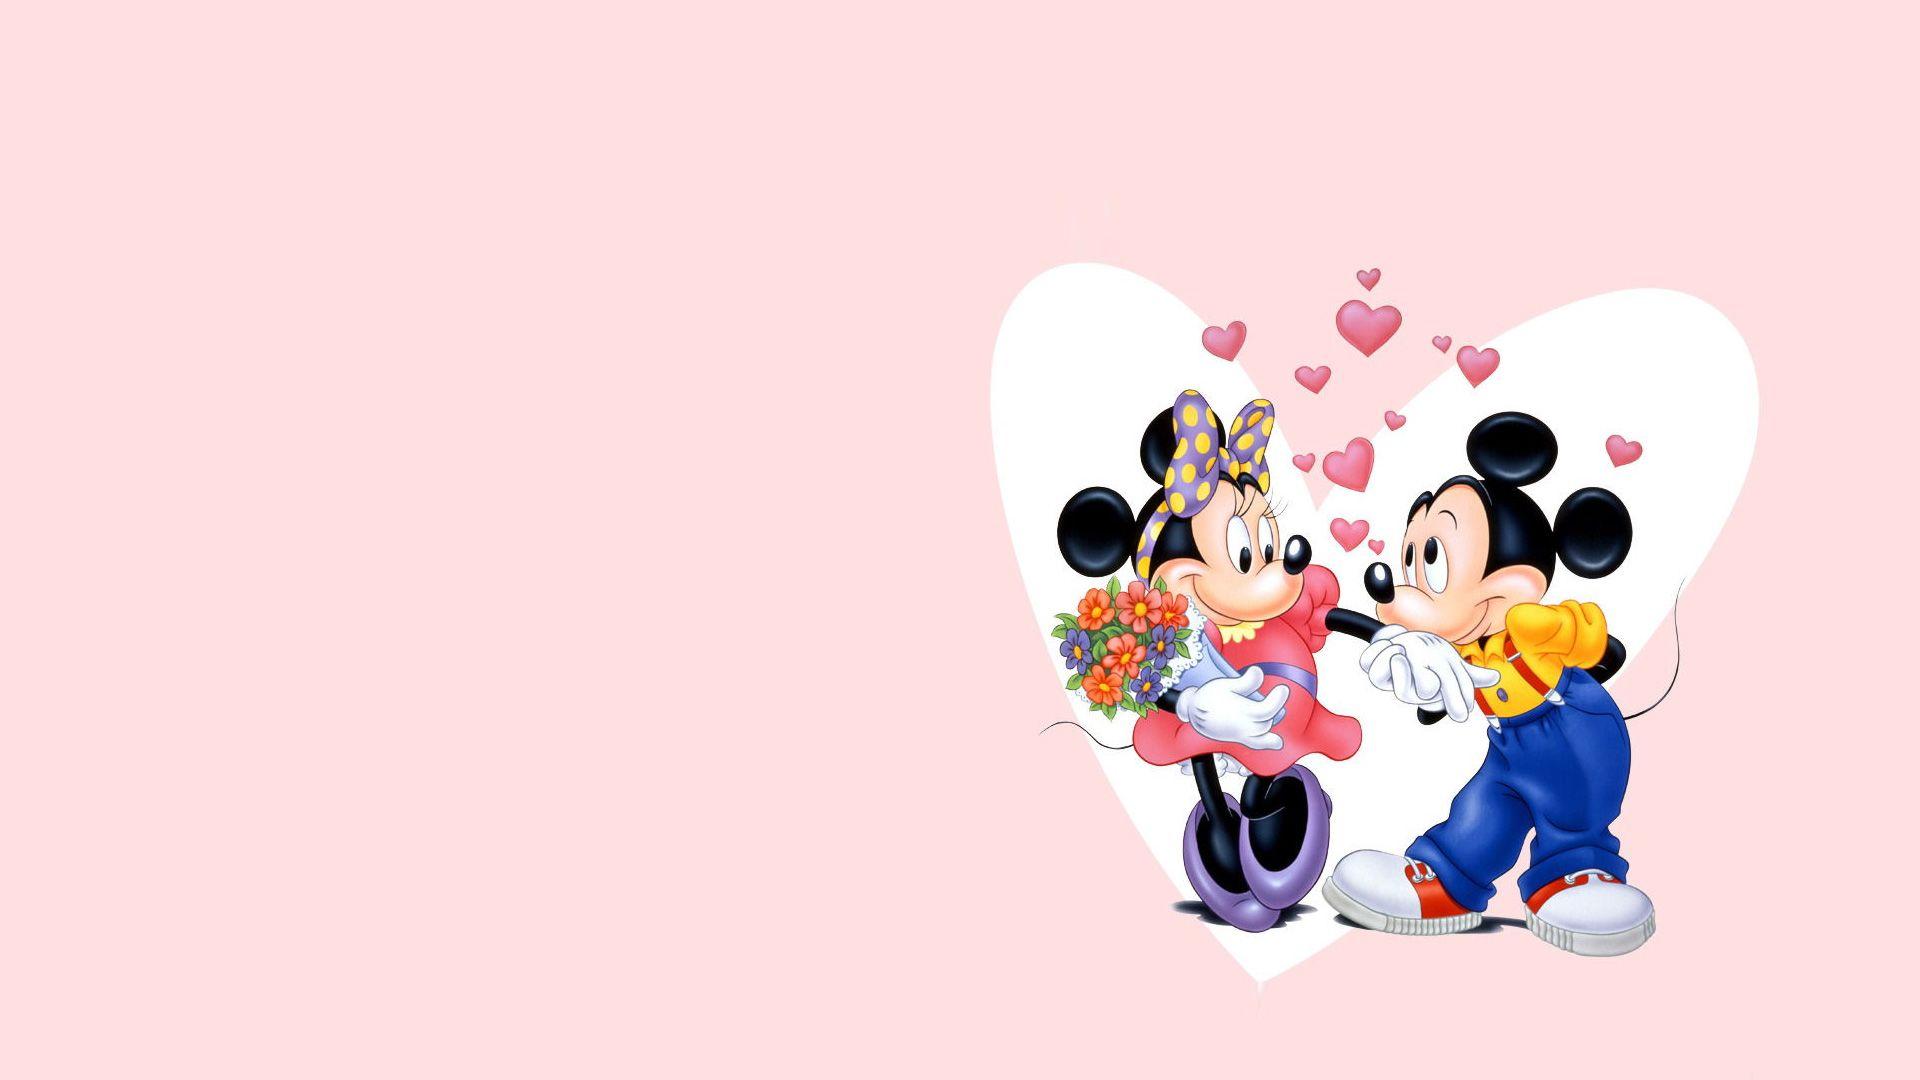 Mickey Mouse and Minnie Mouse in love on a pink background - Minnie Mouse